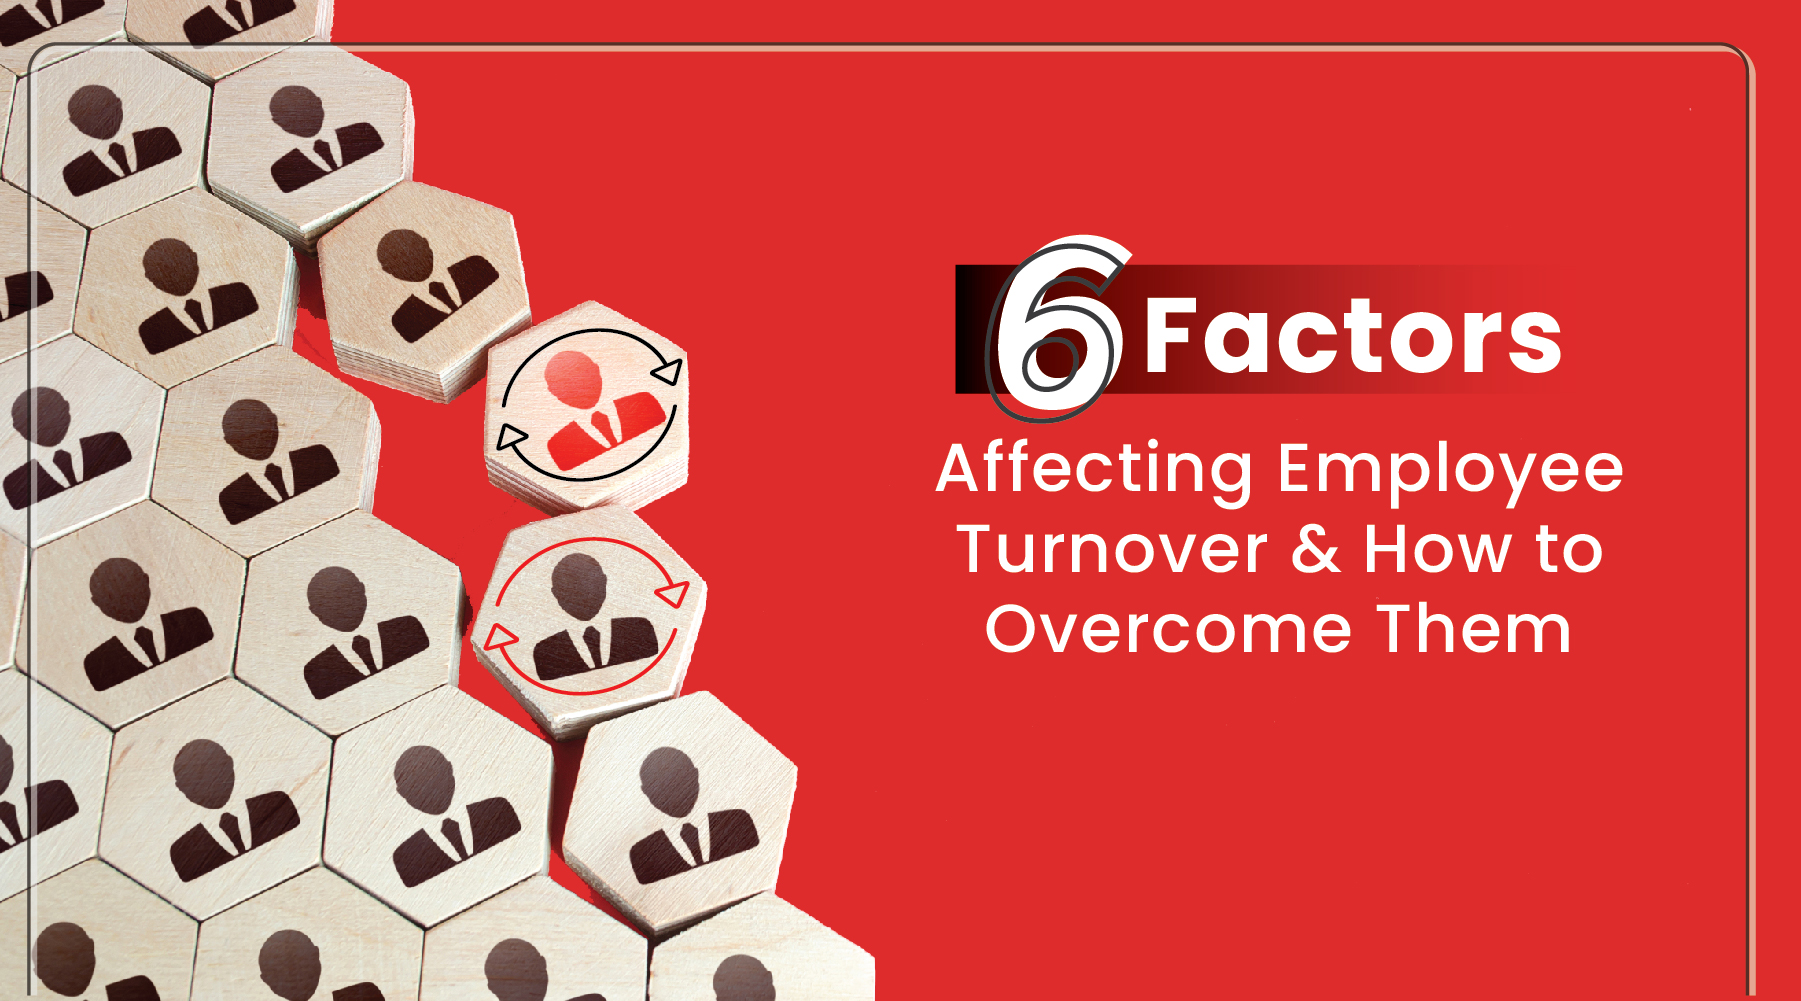 6 factors affecting employee turnover and how to overcome them